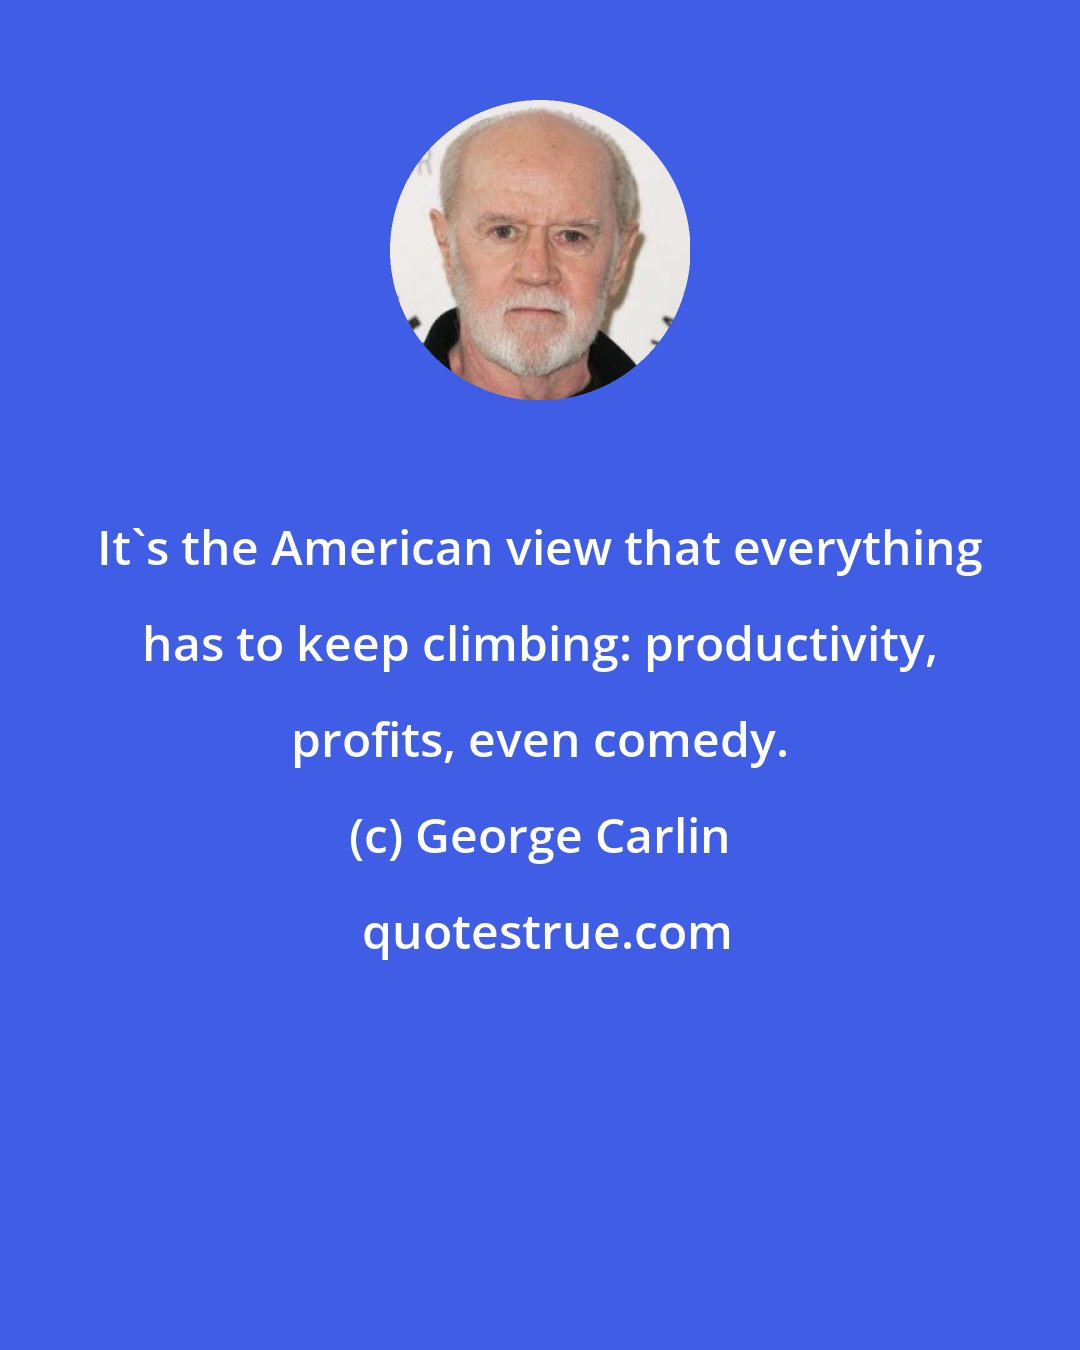 George Carlin: It's the American view that everything has to keep climbing: productivity, profits, even comedy.